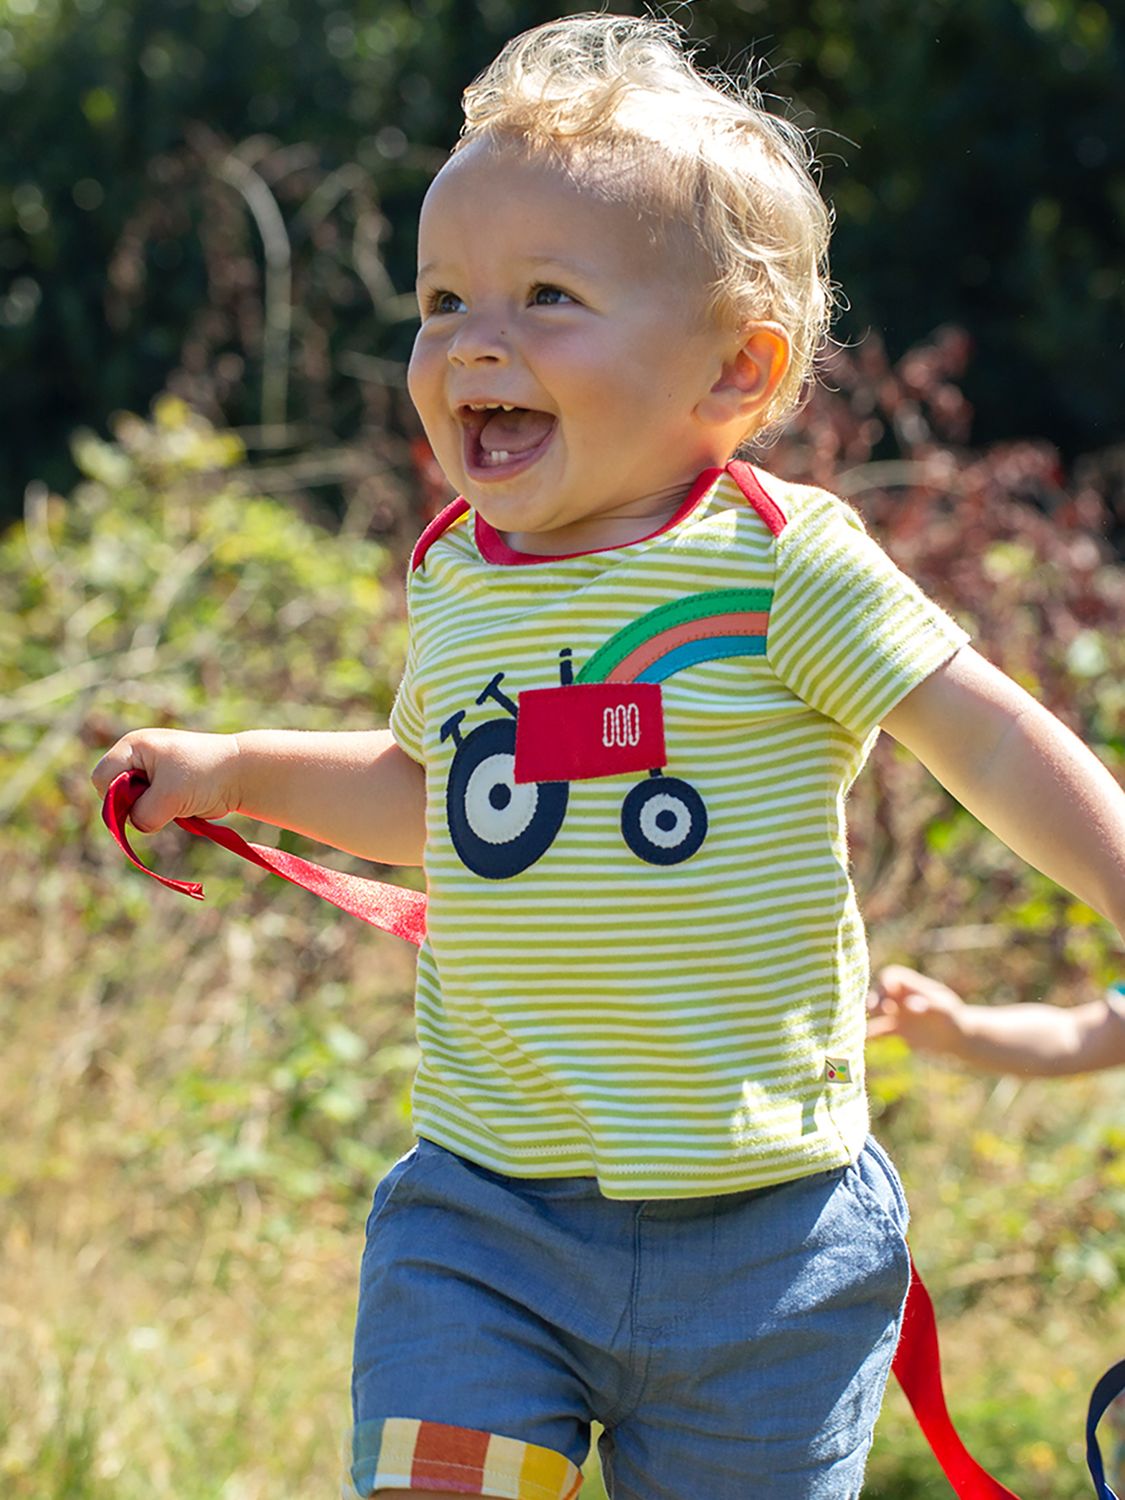 Buy Frugi Baby Bobster Organic Cotton Tractor Applique T-Shirt, Pear/Multi Online at johnlewis.com